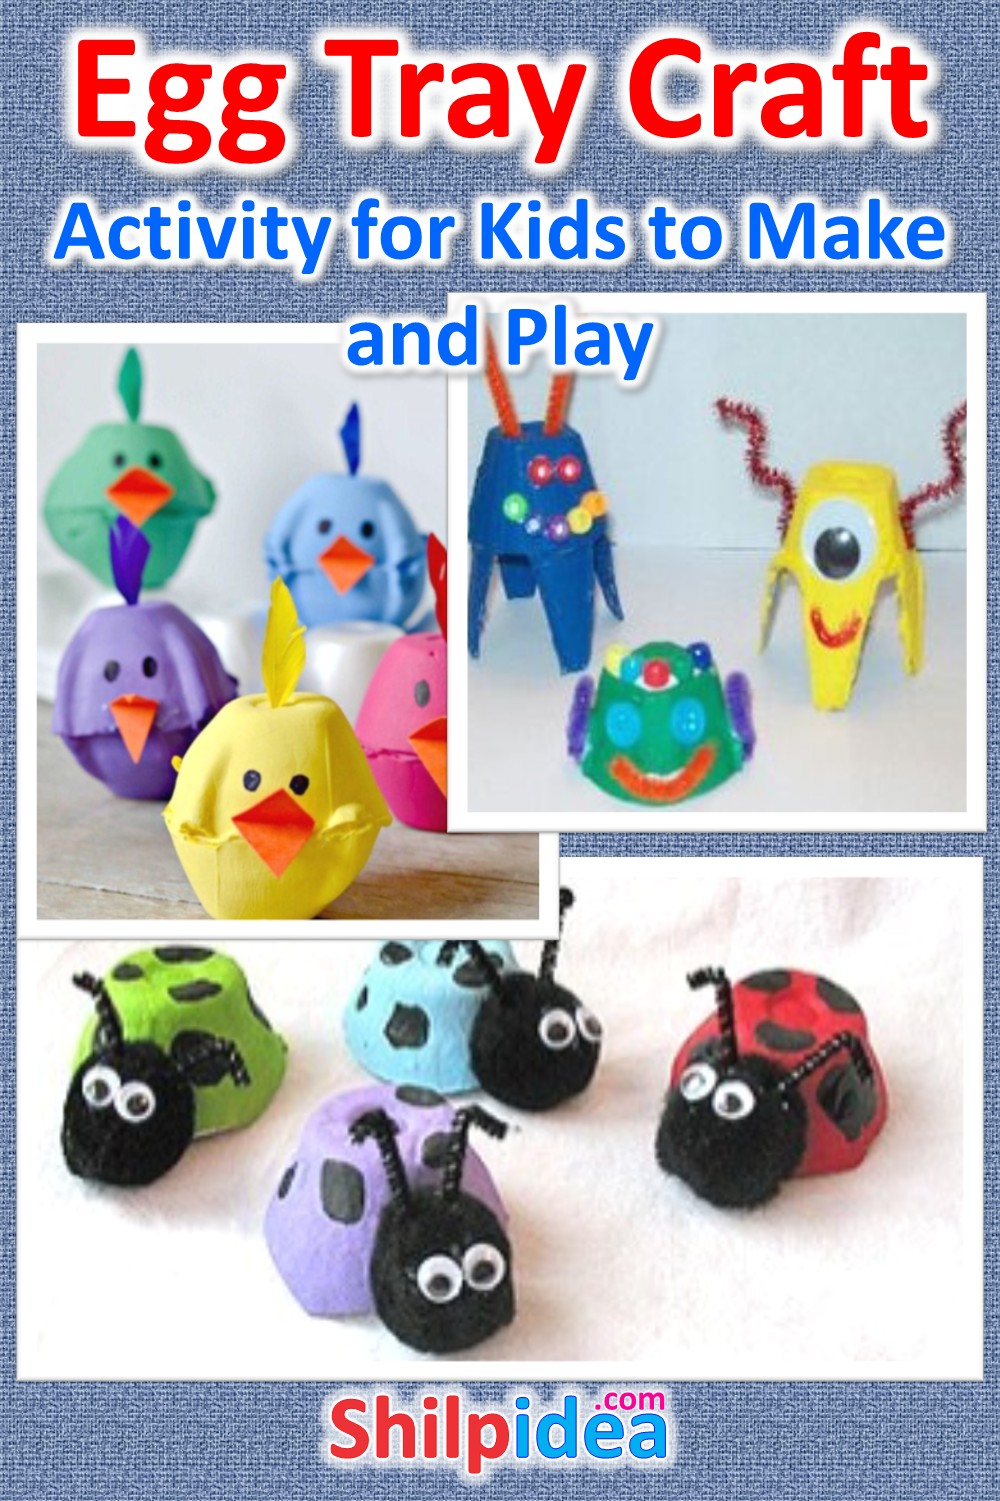 egg-tray-craft-activity-for-kids-shilpidea-pin